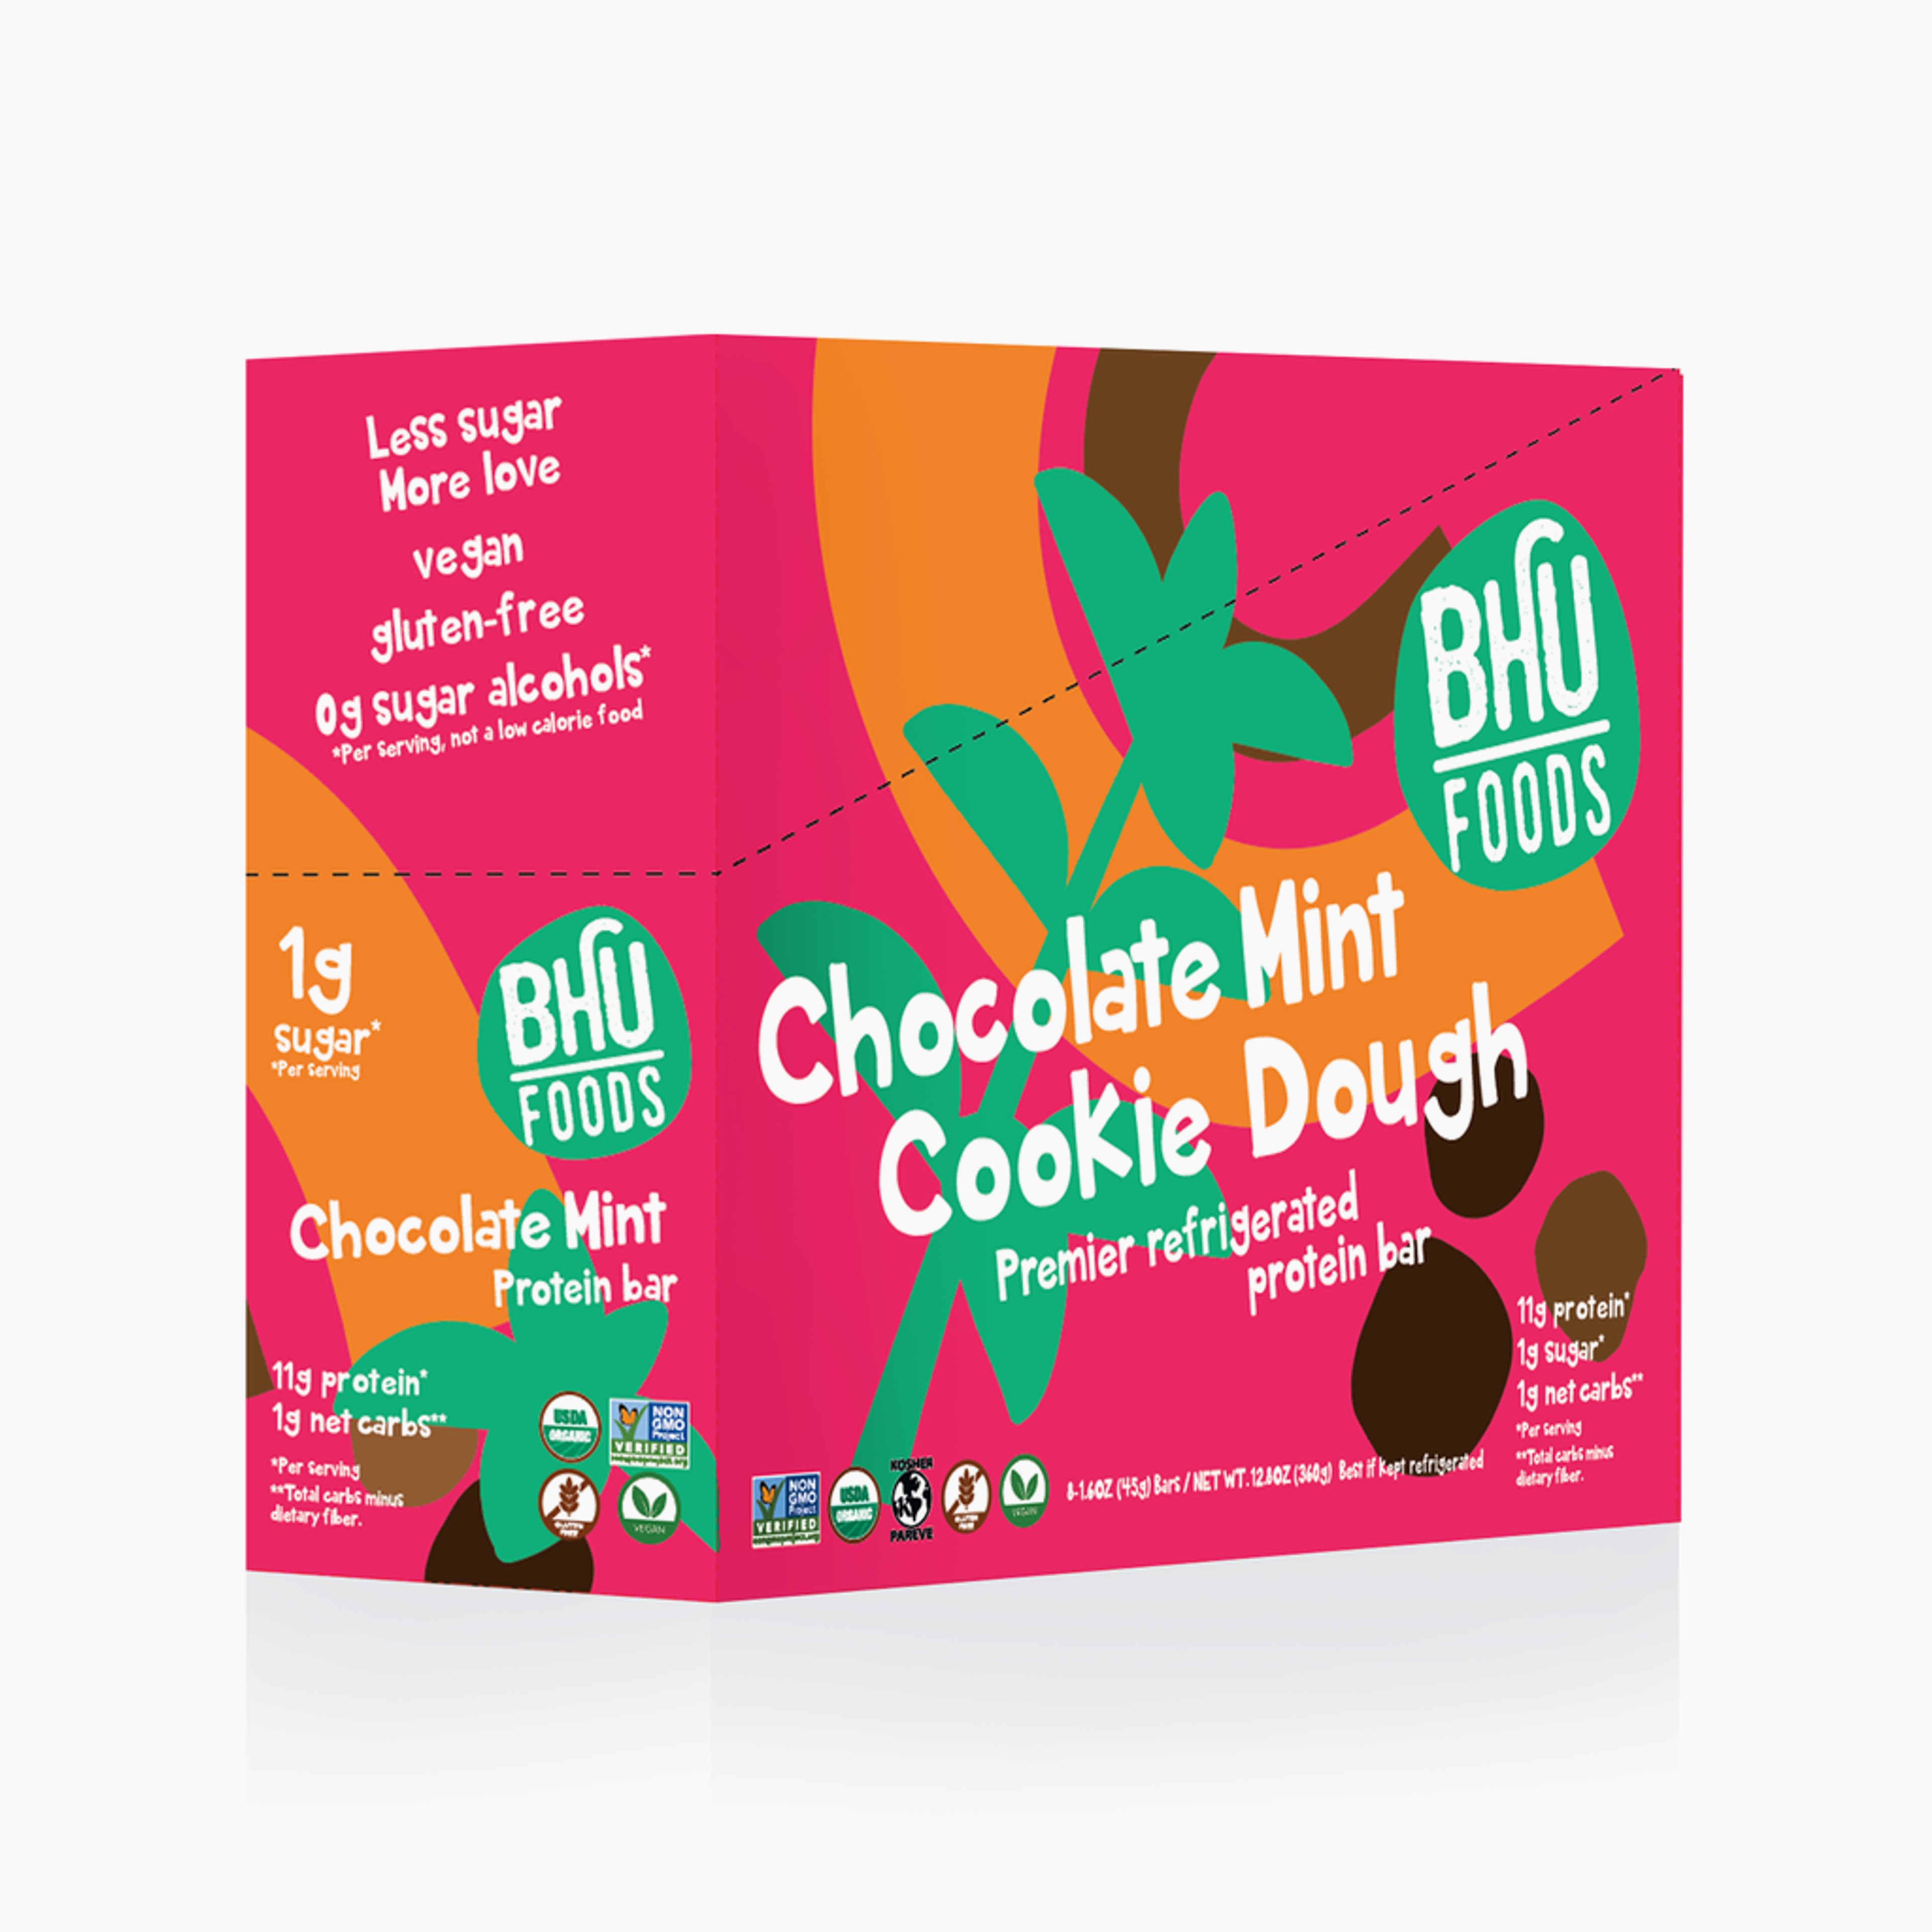 Premier Refrigerated Protein Bar - Mint Double Dark Chocolate Cookie Dough (8 bars - 1.6oz each)